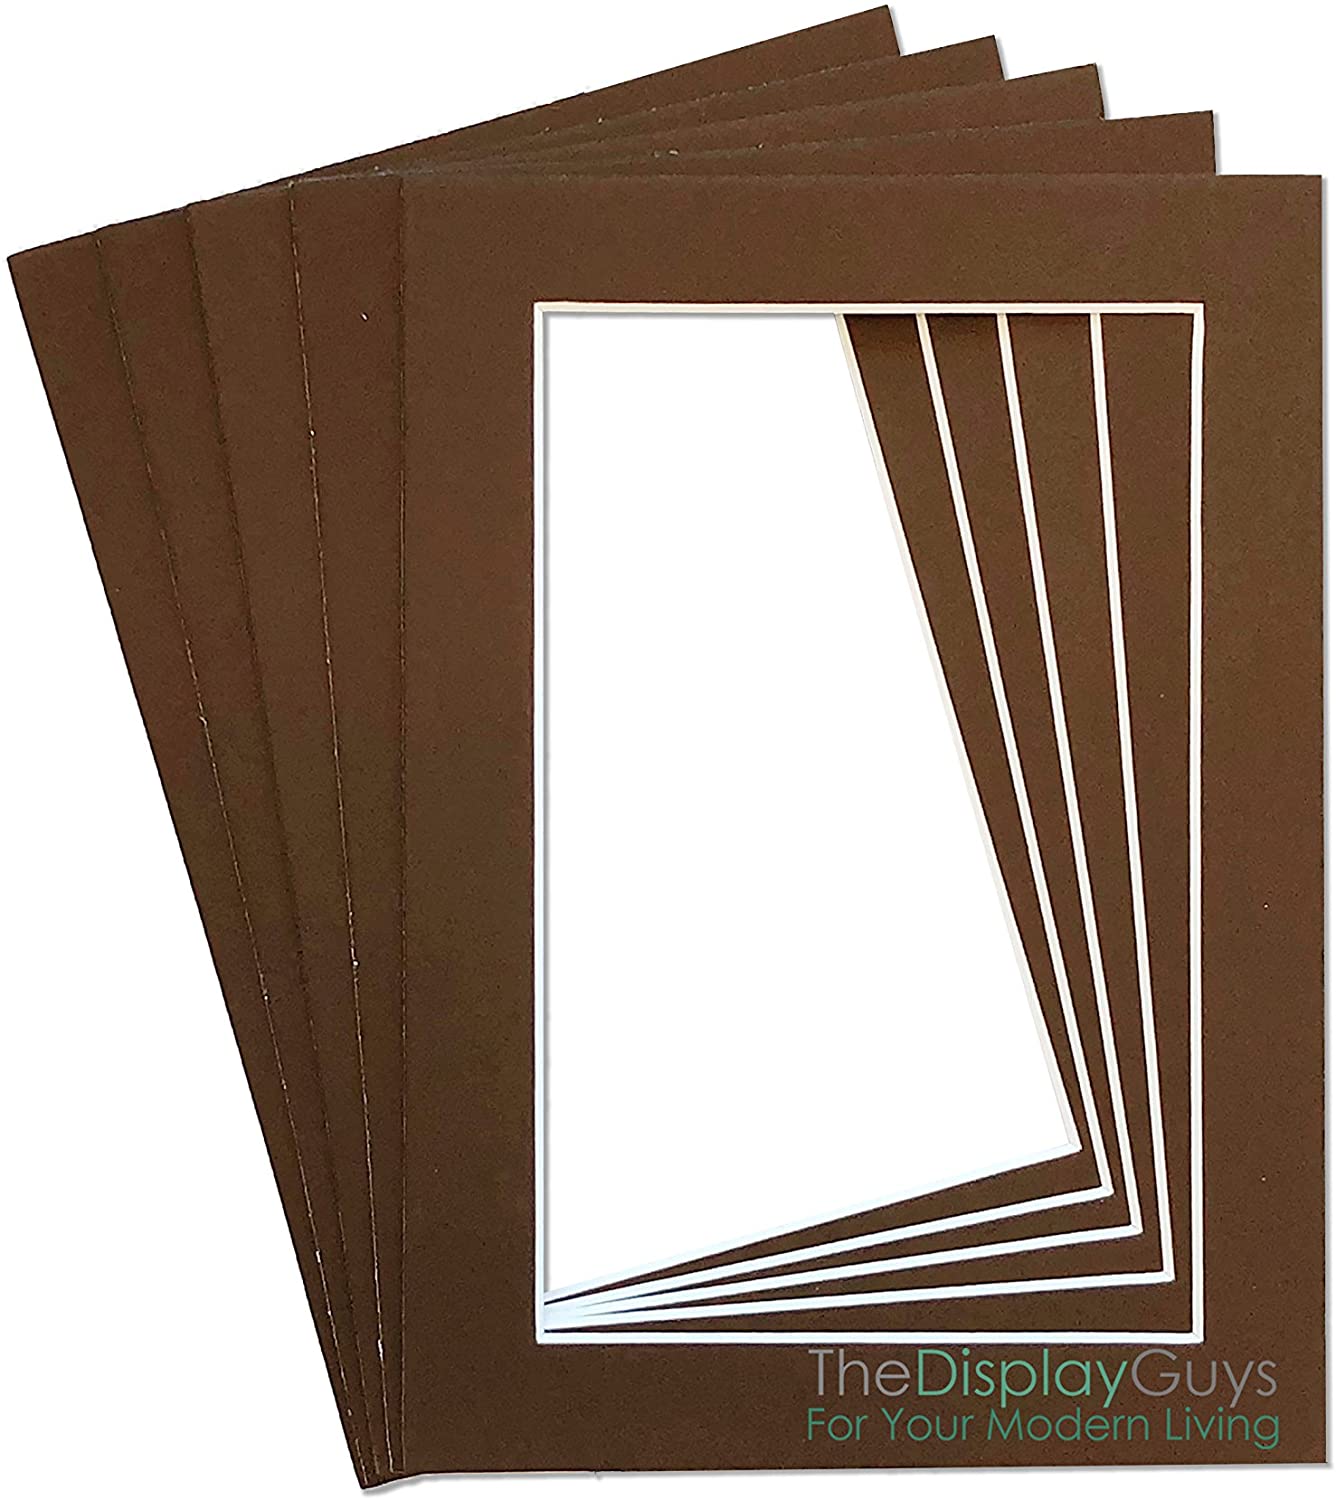 5" x 7" 25 Pack of Brown Mat Boards, Backing Boards and Plastic Bags